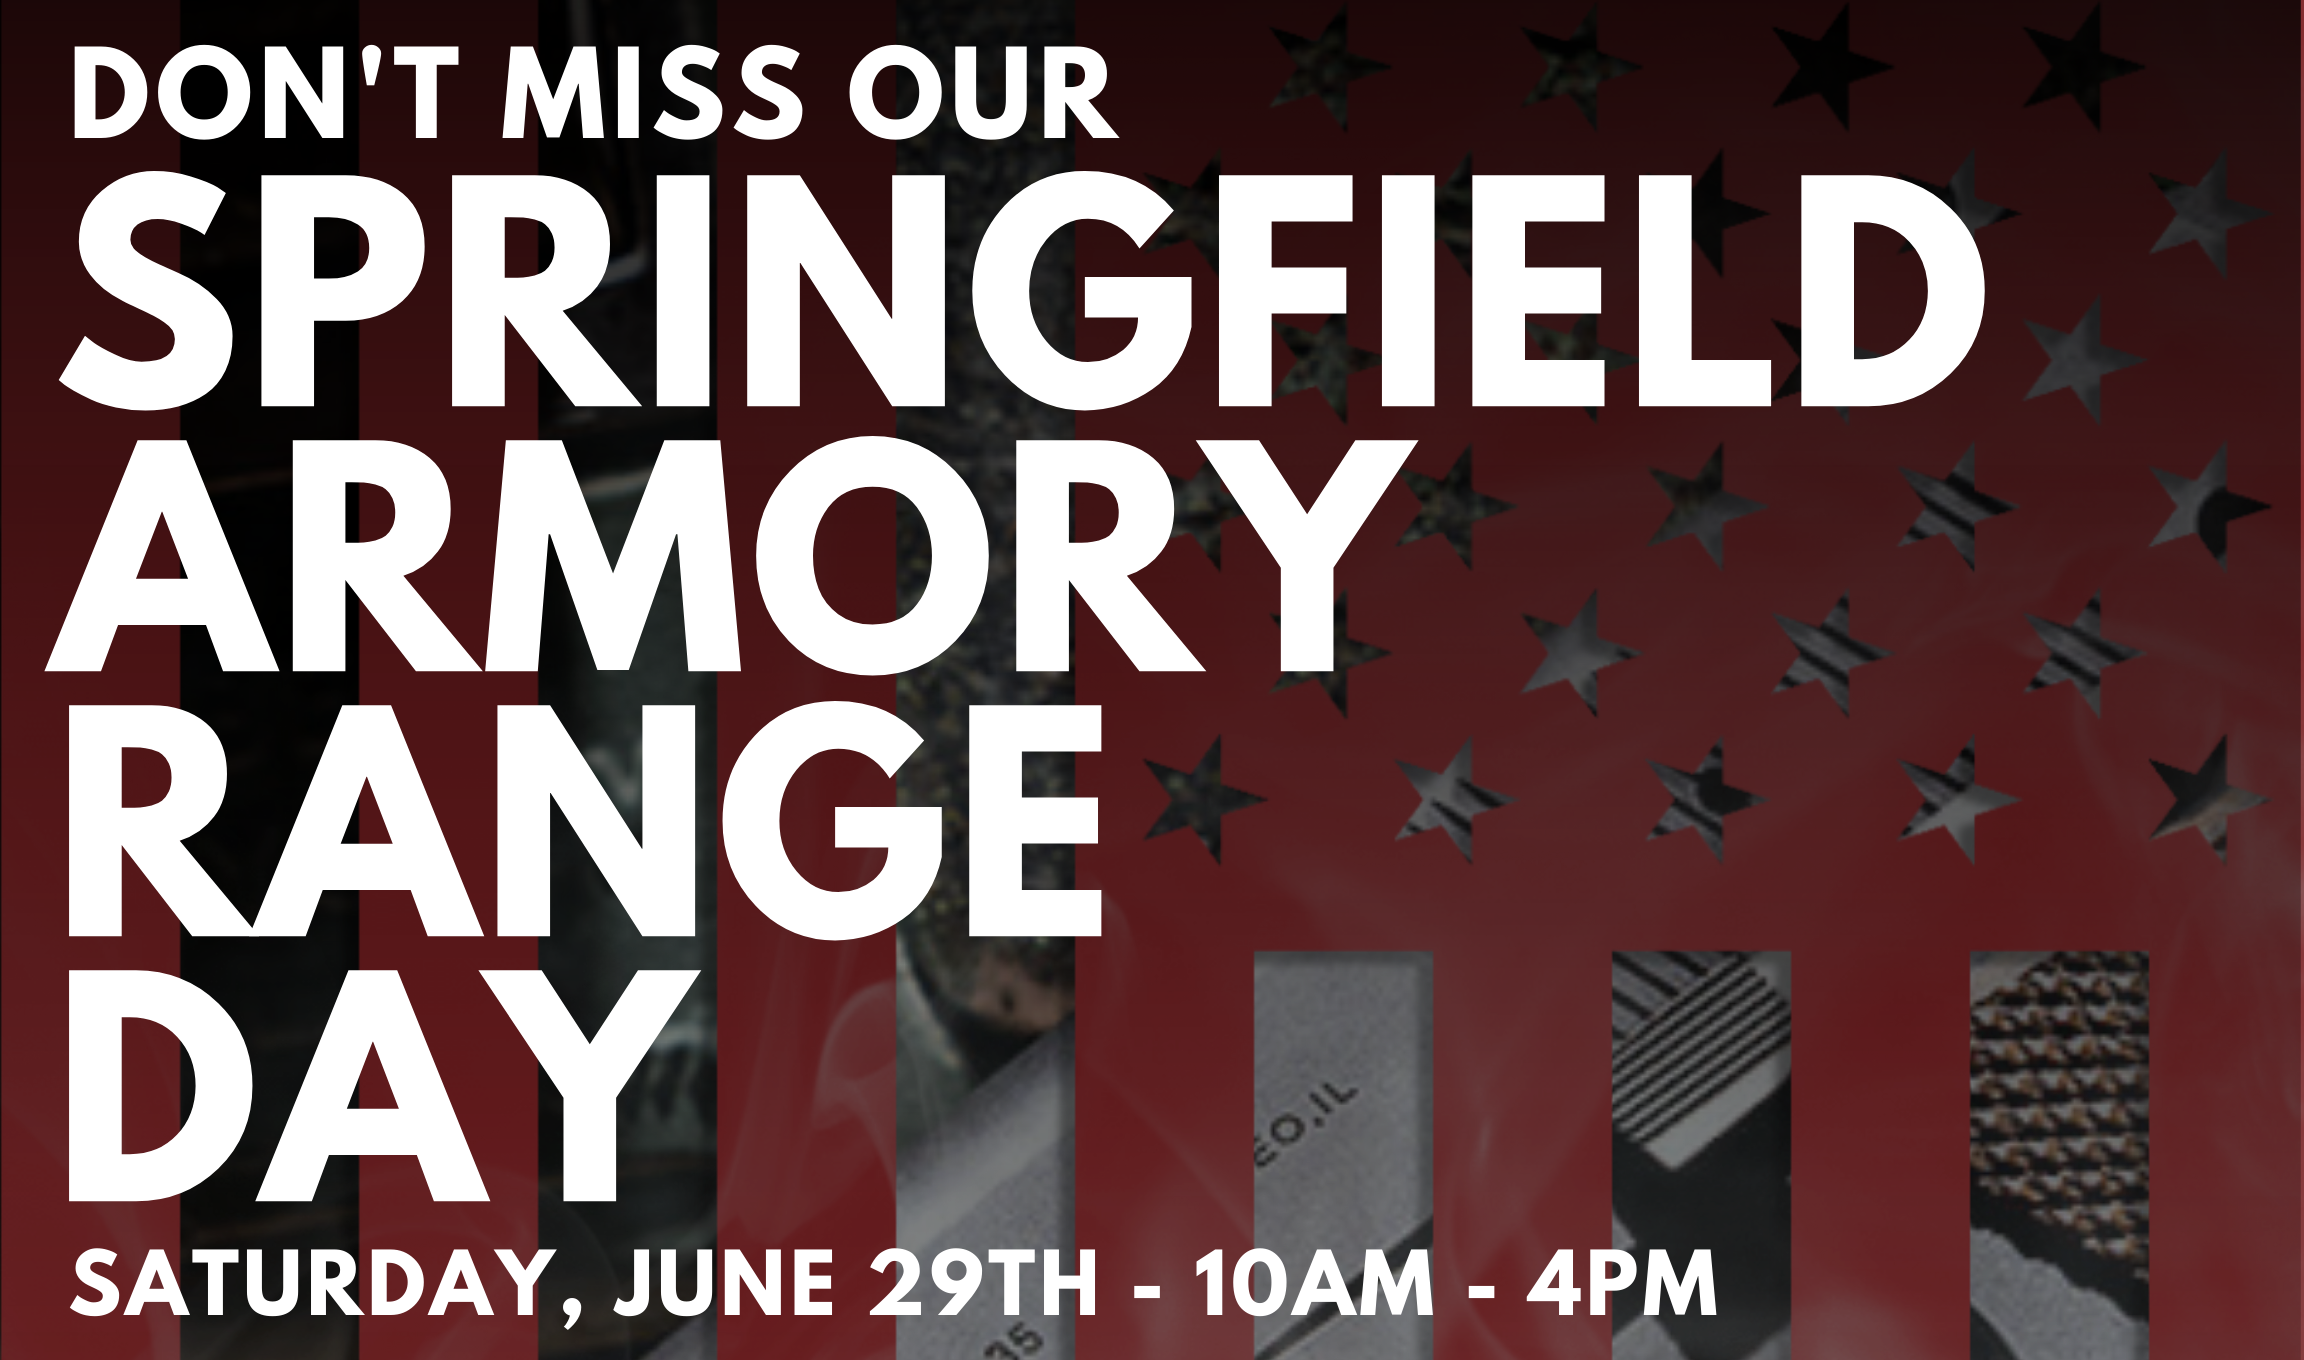 JOIN US FOR OUR SPRINGFIELD ARMORY DAY